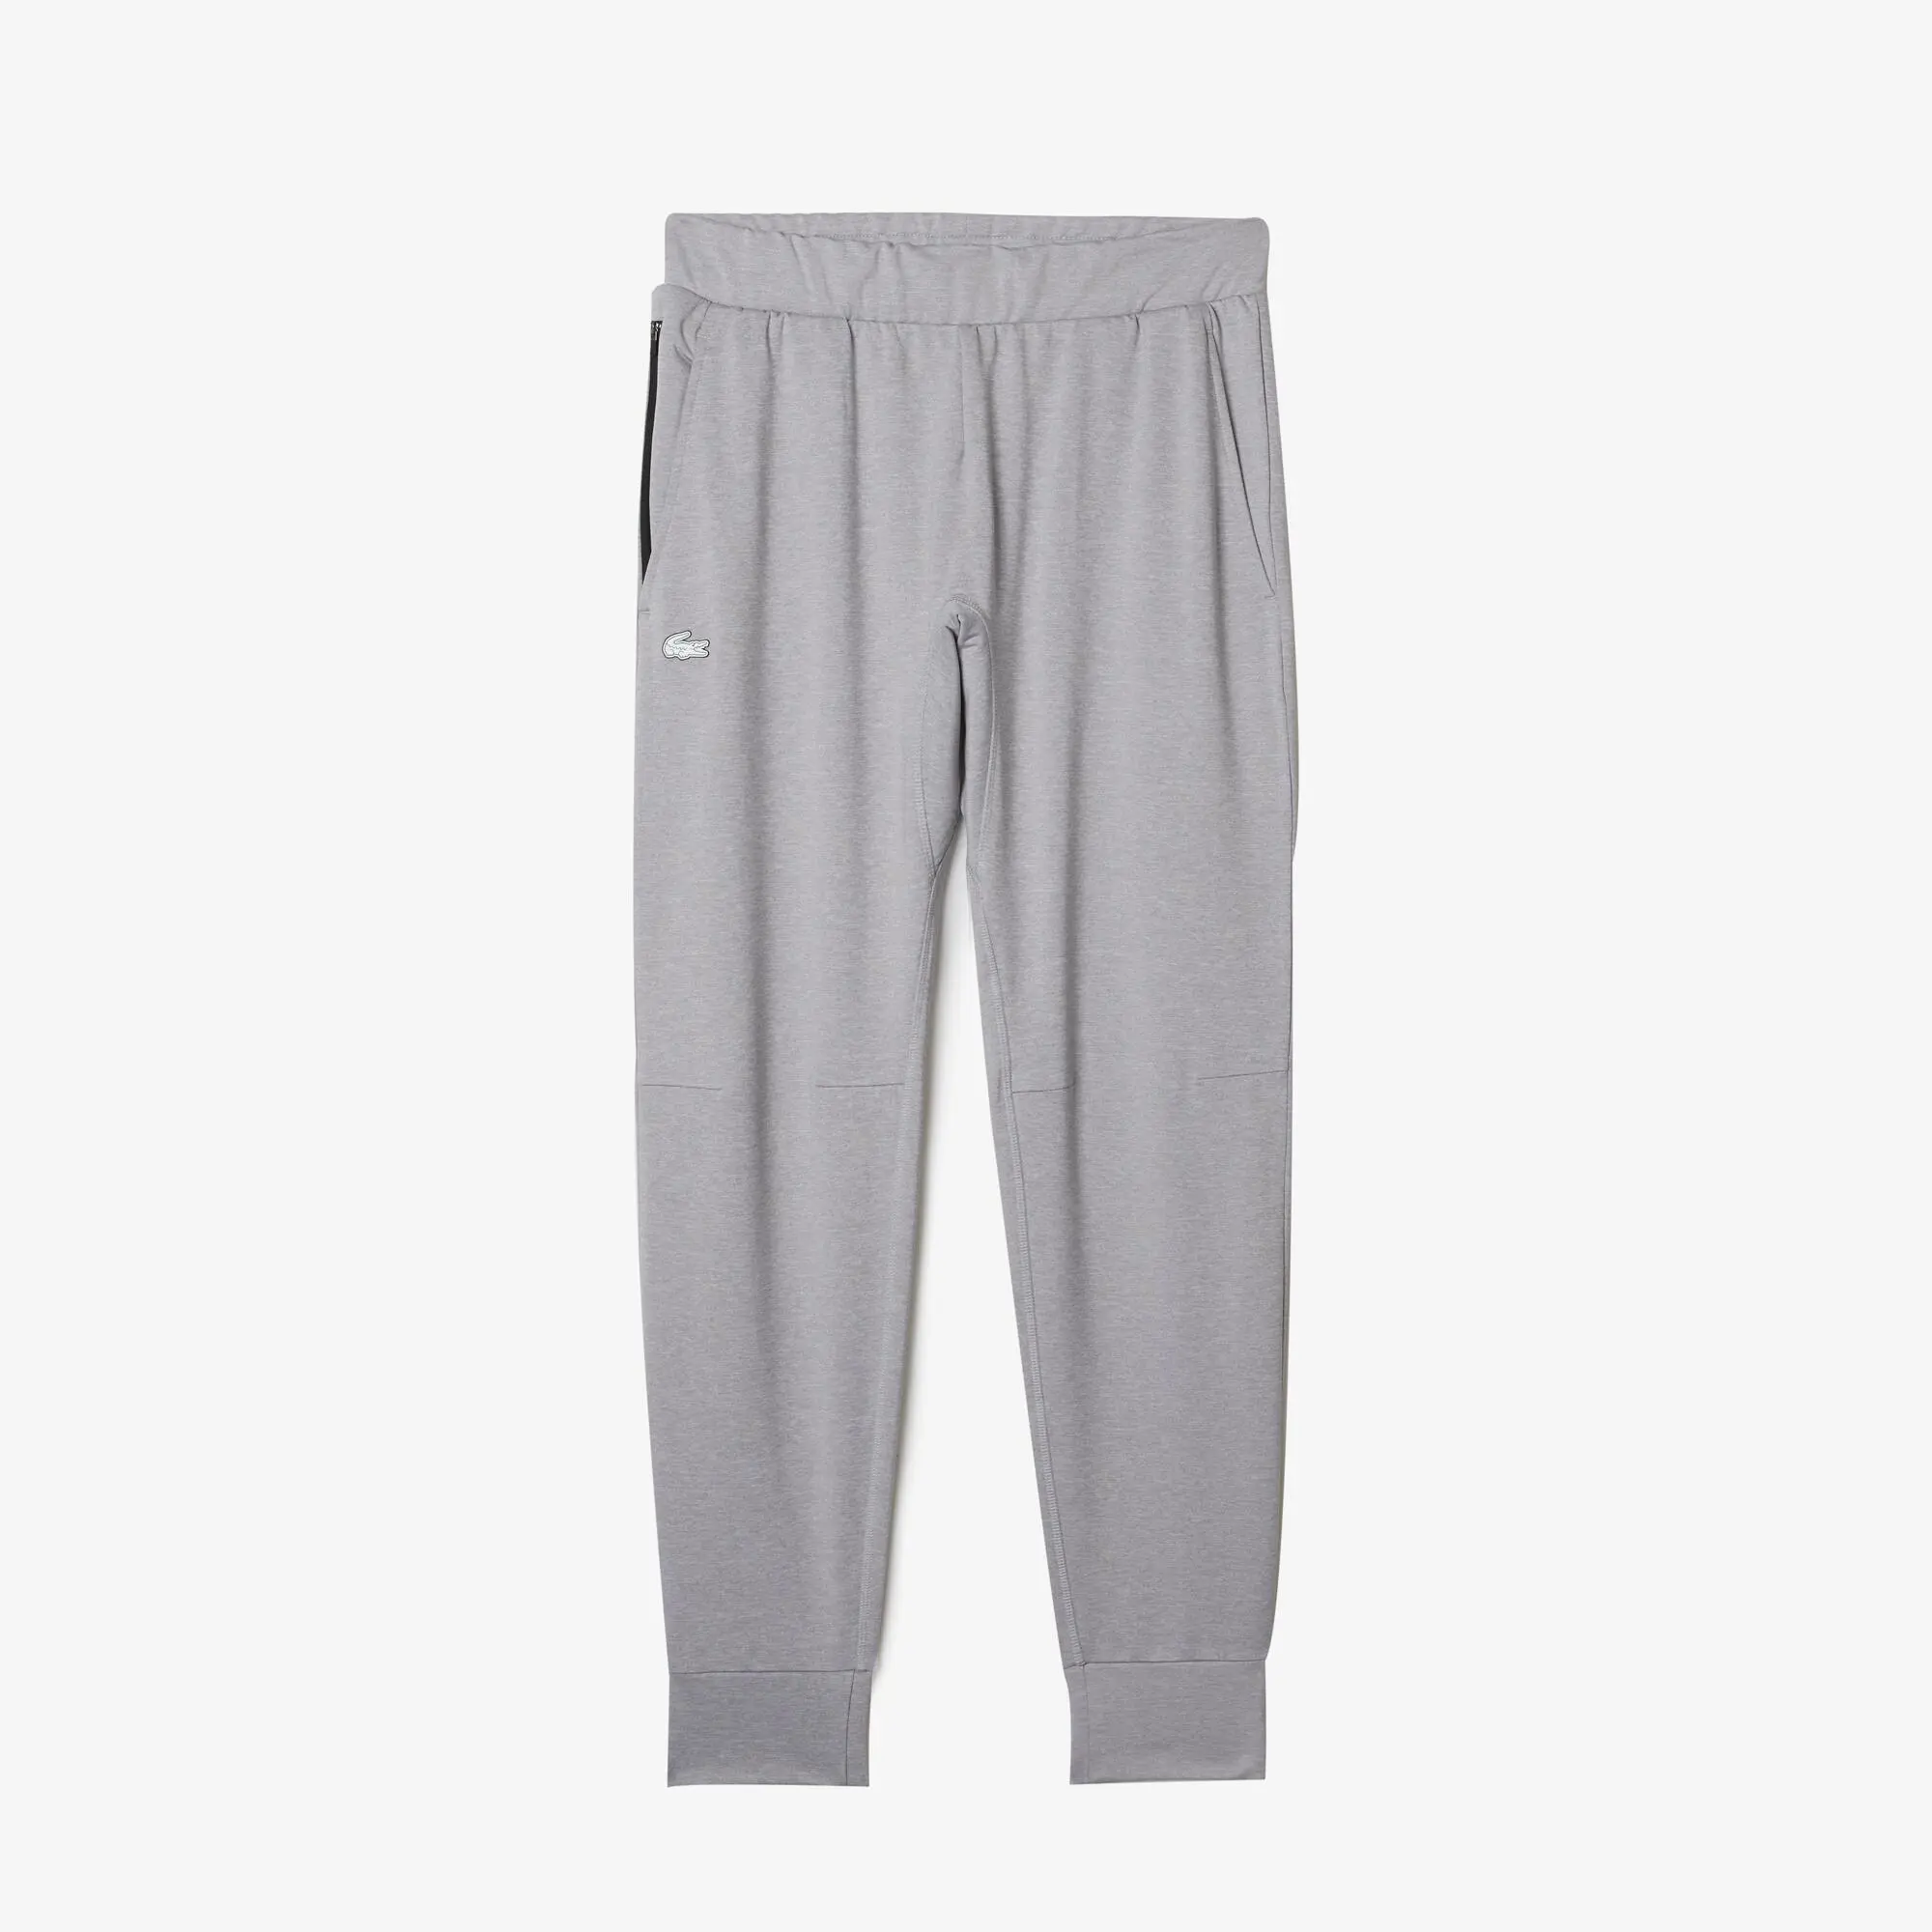 Lacoste Men's SPORT Tapered Joggers. 2